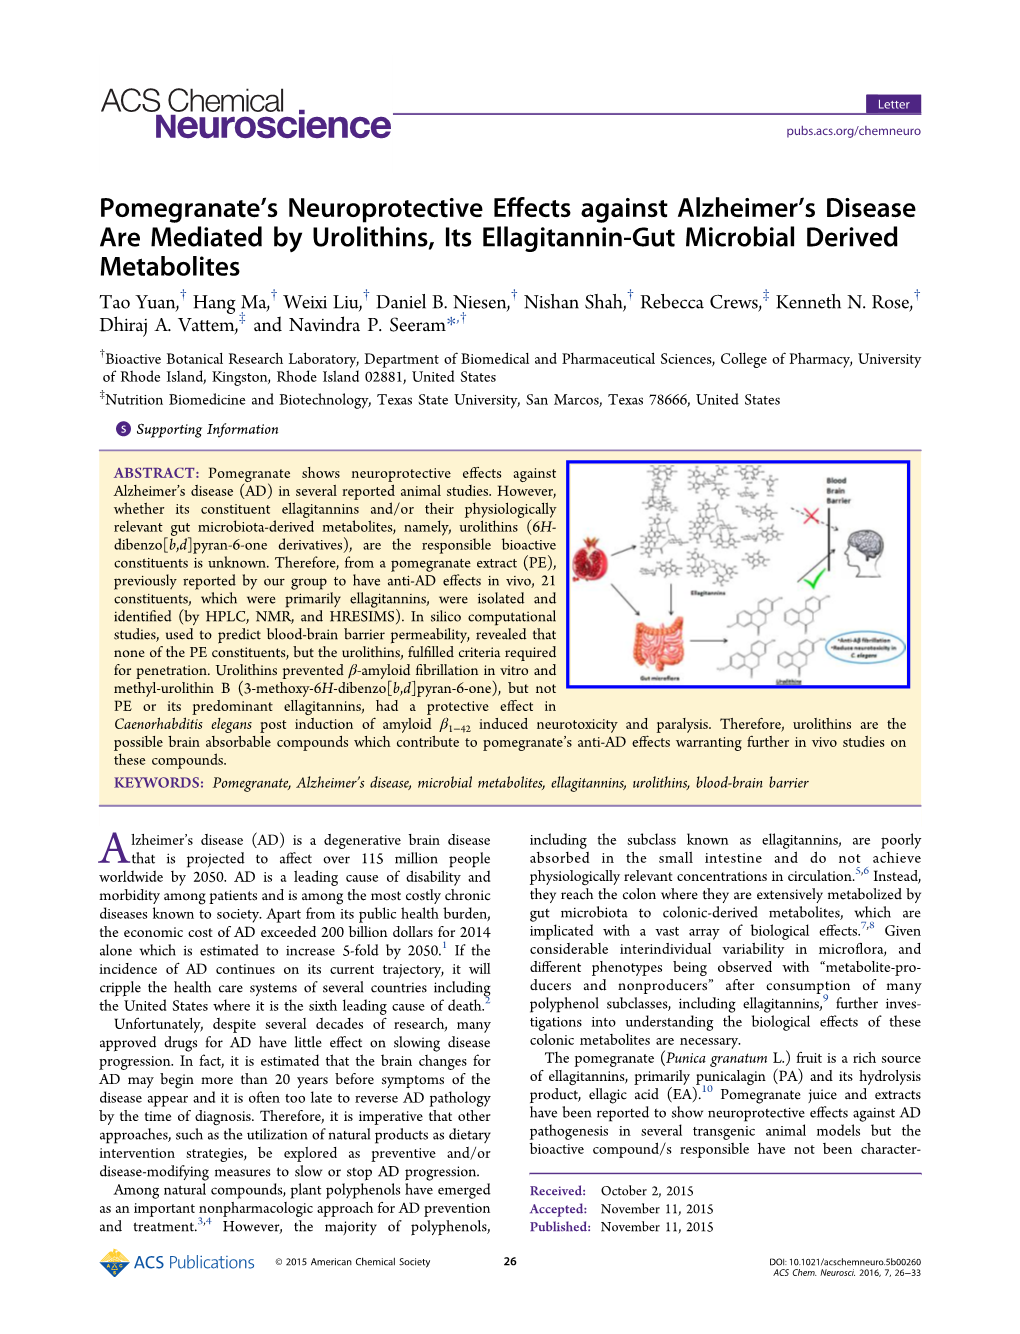 Pomegranate's Neuroprotective Effects Against Alzheimer's Disease Are Mediated by Urolithins, Its Ellagitannin-Gut Microbial